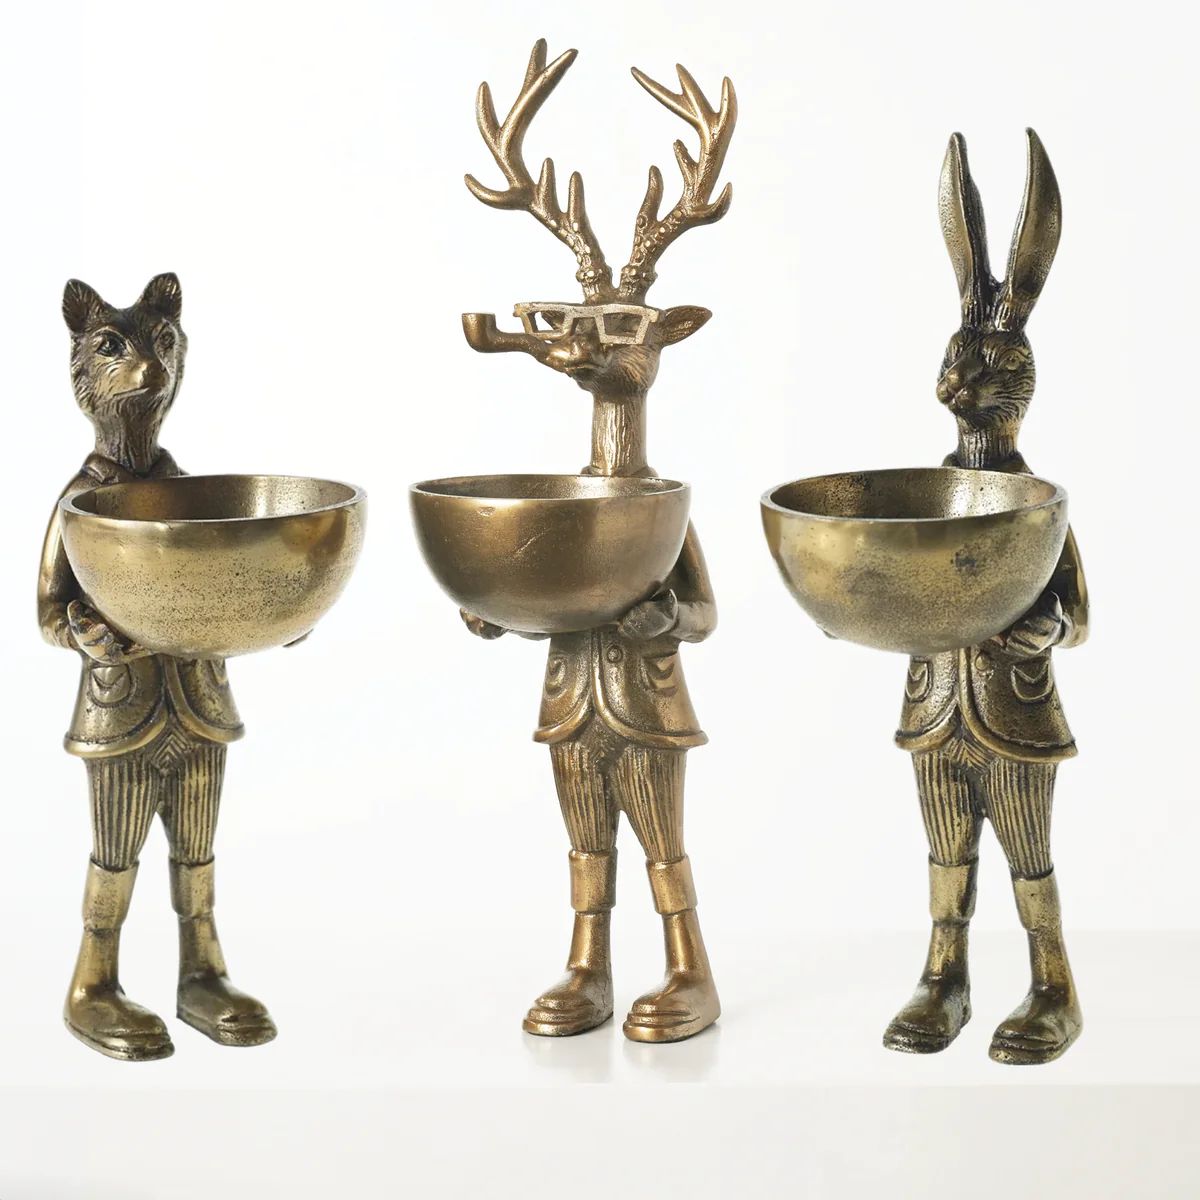 Eric + Eloise Bronzed Aluminum Serving Dish Standing Bookends Collection | Darby Creek Trading